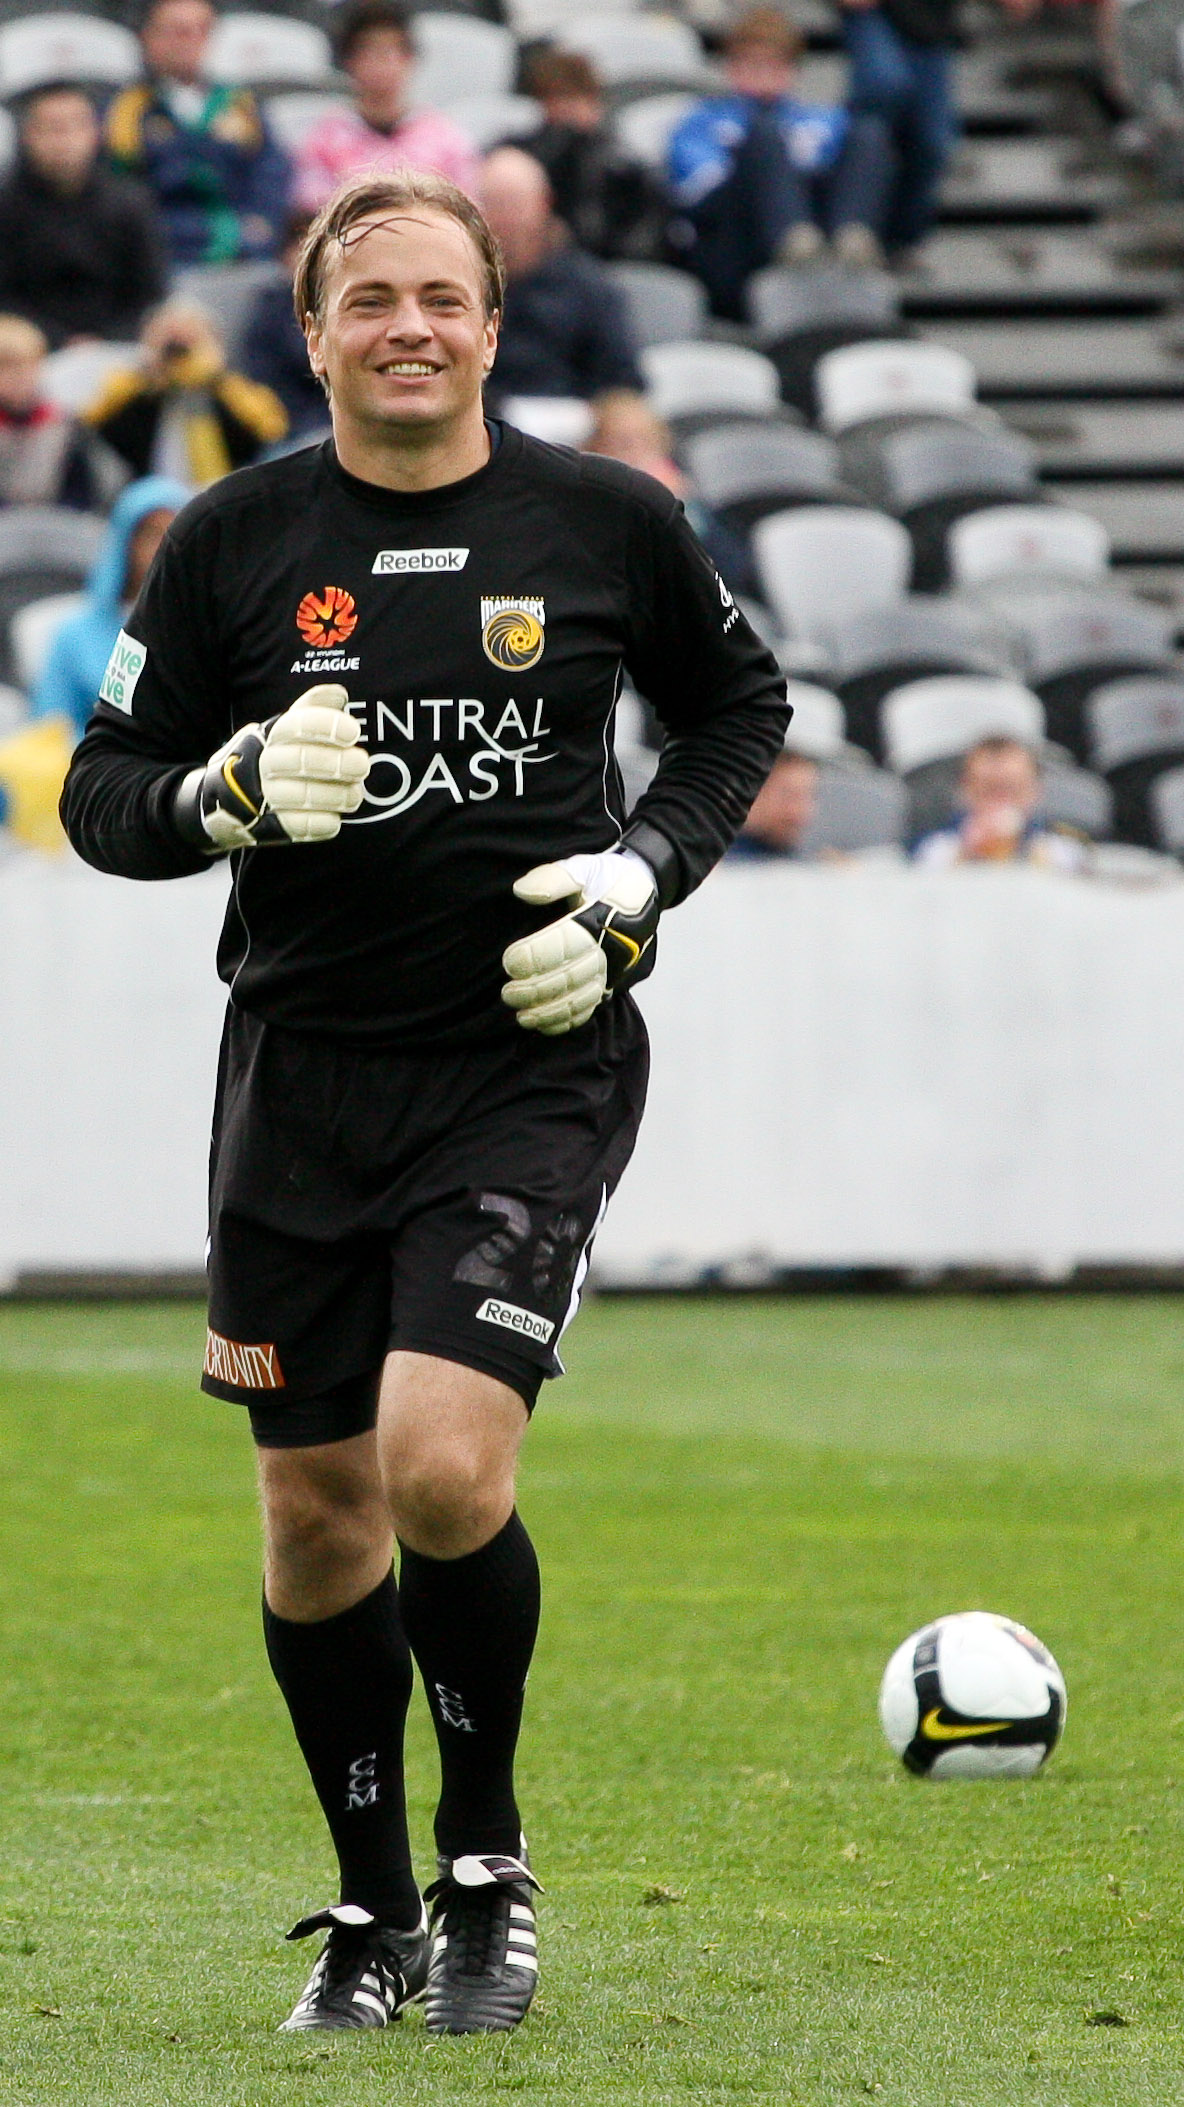 Bosnich playing for the Central Coast Mariners in 2008